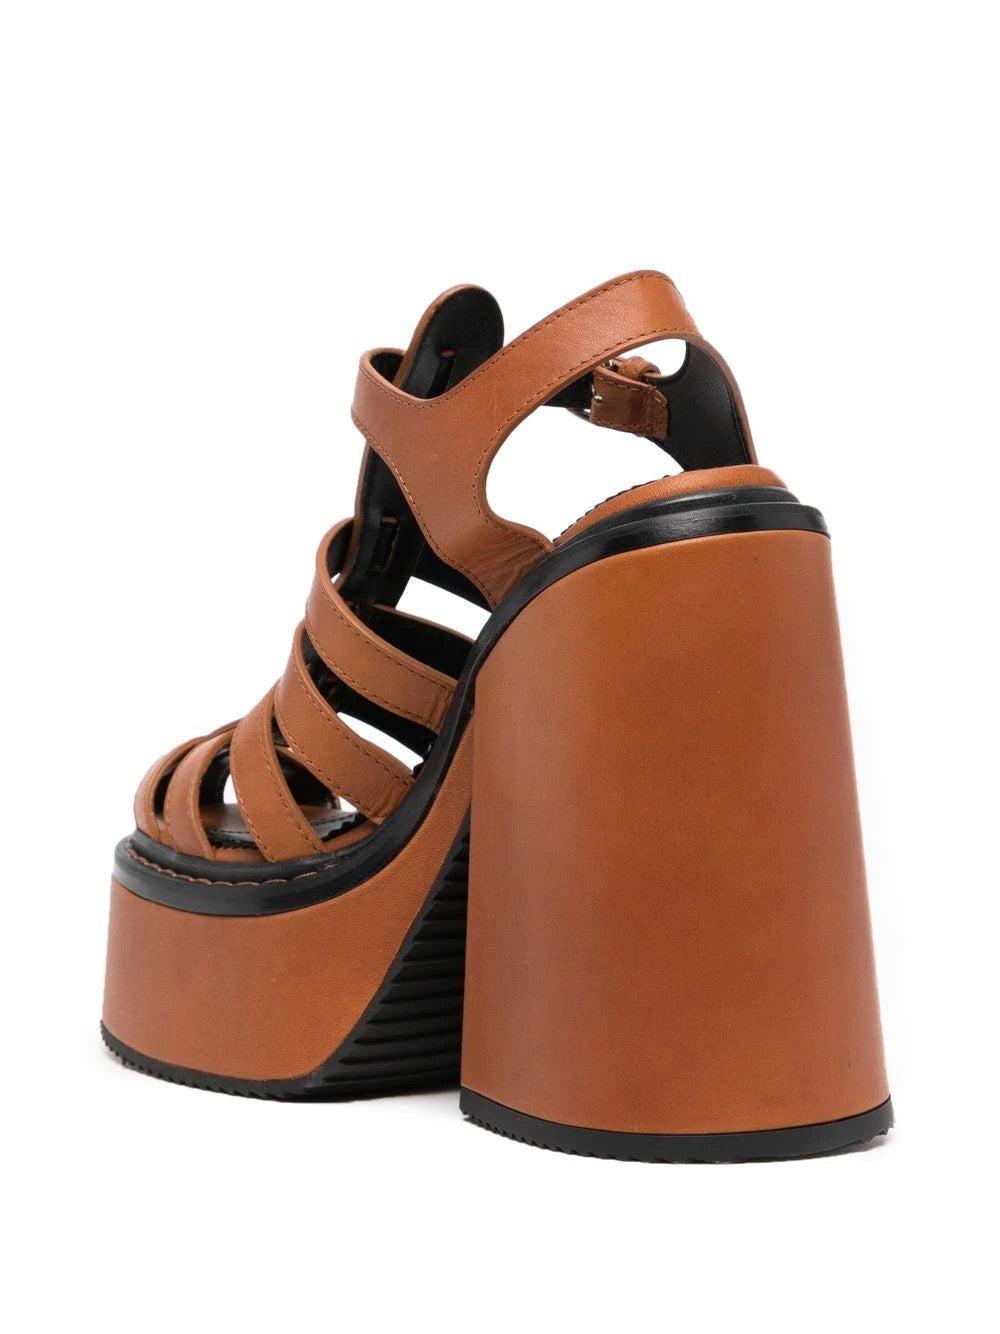 DSquared² Berlin Rock 140mm Leather Sandals in Brown | Lyst